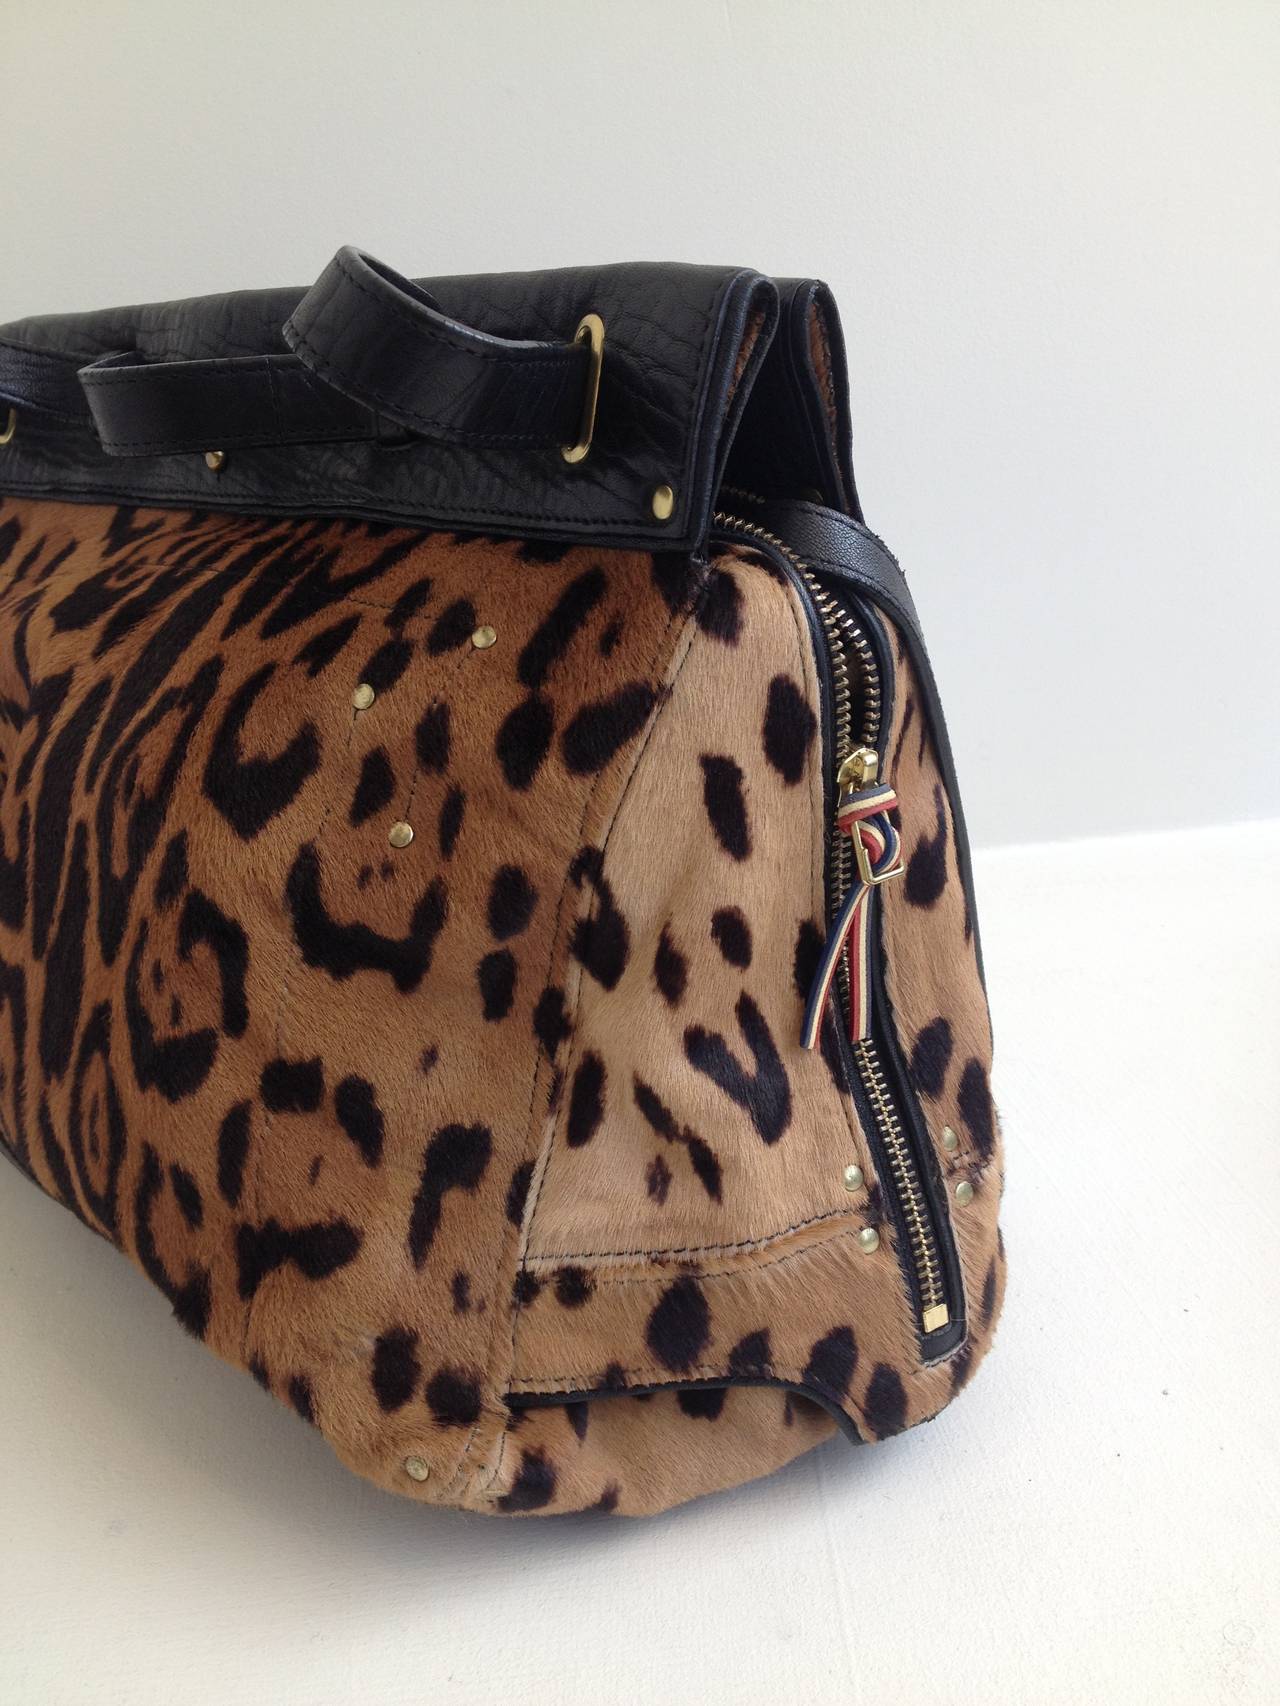 This easy handbag in leopard print pony hair is the perfect way to kick up your look - the interior is spacious and holds everything you need for the day, while the snaps at the top are secure without being too difficult to get into while the strap